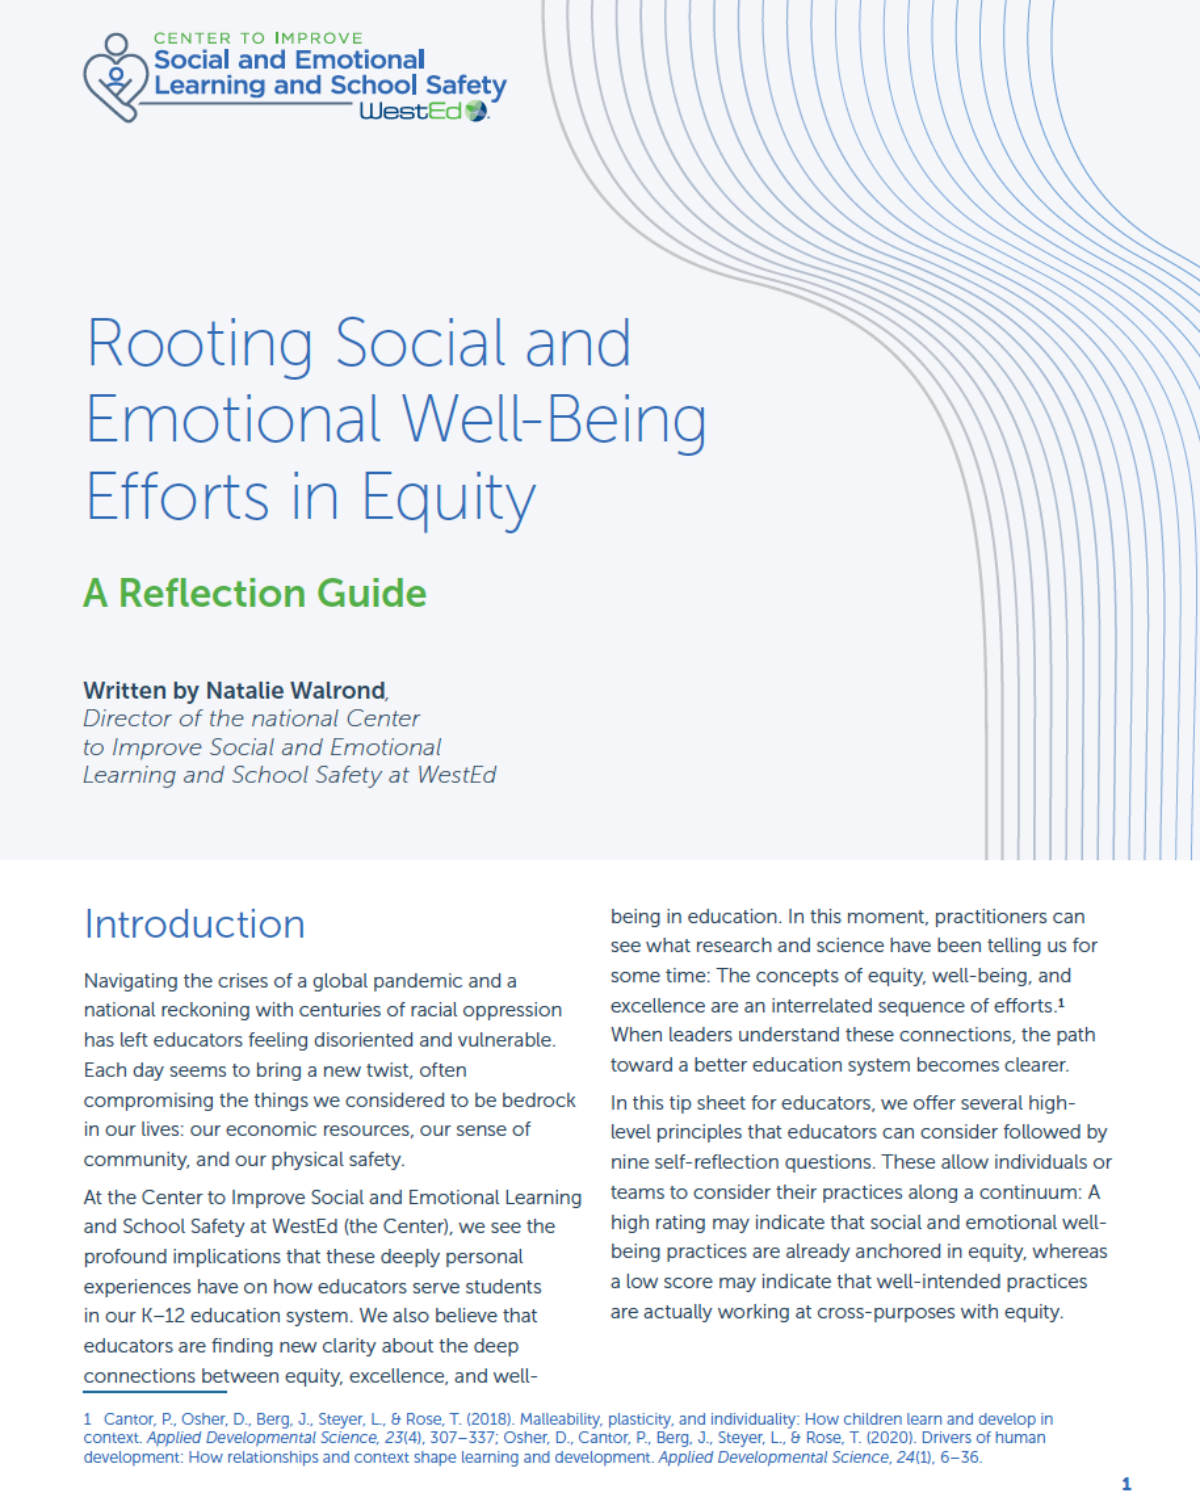 Rooting Social and Emotional Well-Being Efforts in Equity